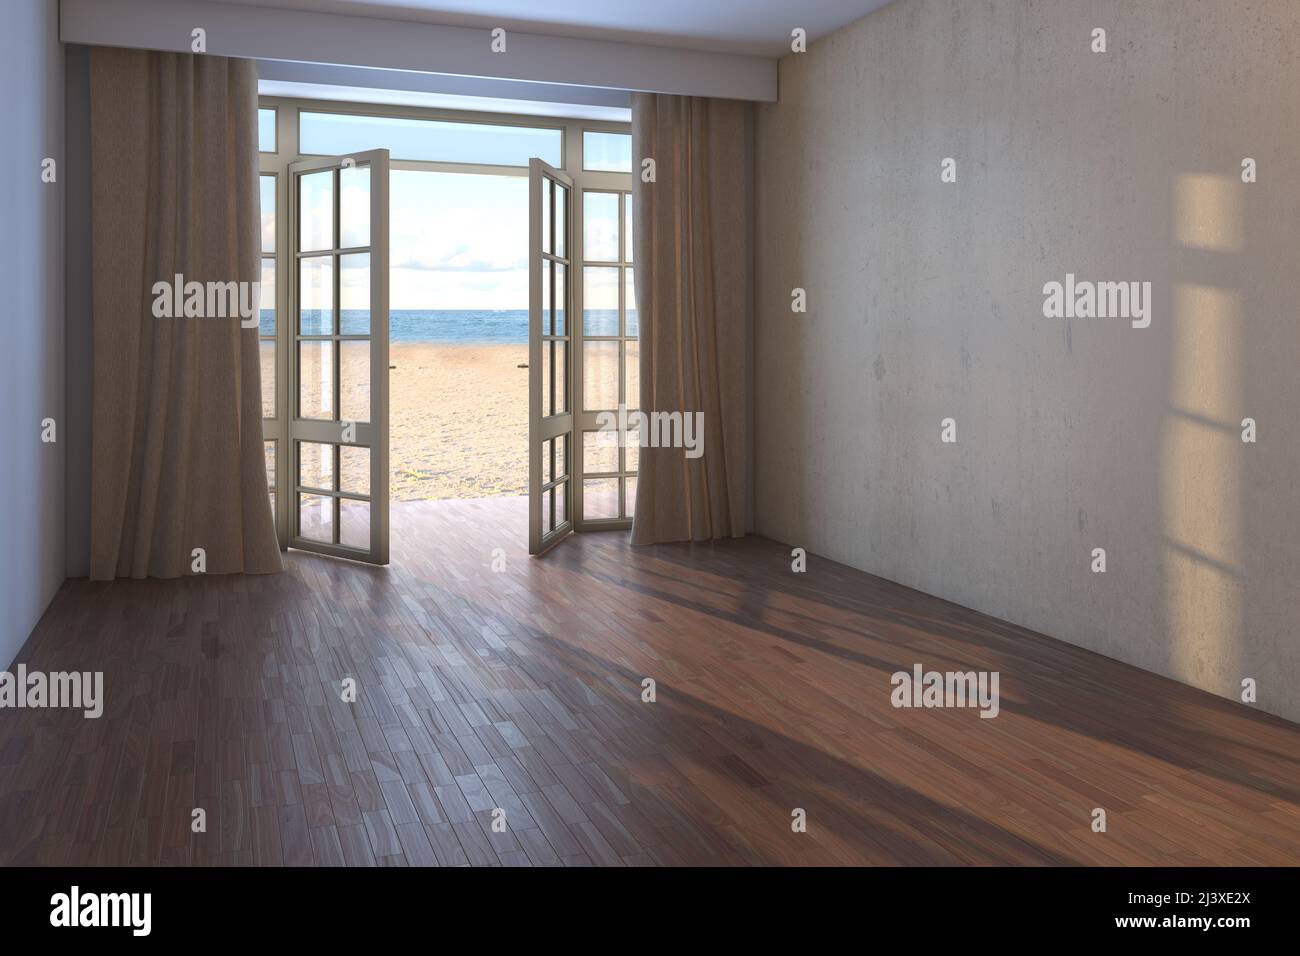 Empty Hotel Room with Sea View. Interior with Open Door Overlooking the Ocean, Beige Curtains, Yellow Sand and Clouds. Dark Parquet Floor and a Beige Stucco Wall. 3D rendering, 8K Ultra HD, 7680x5121 Stock Photo